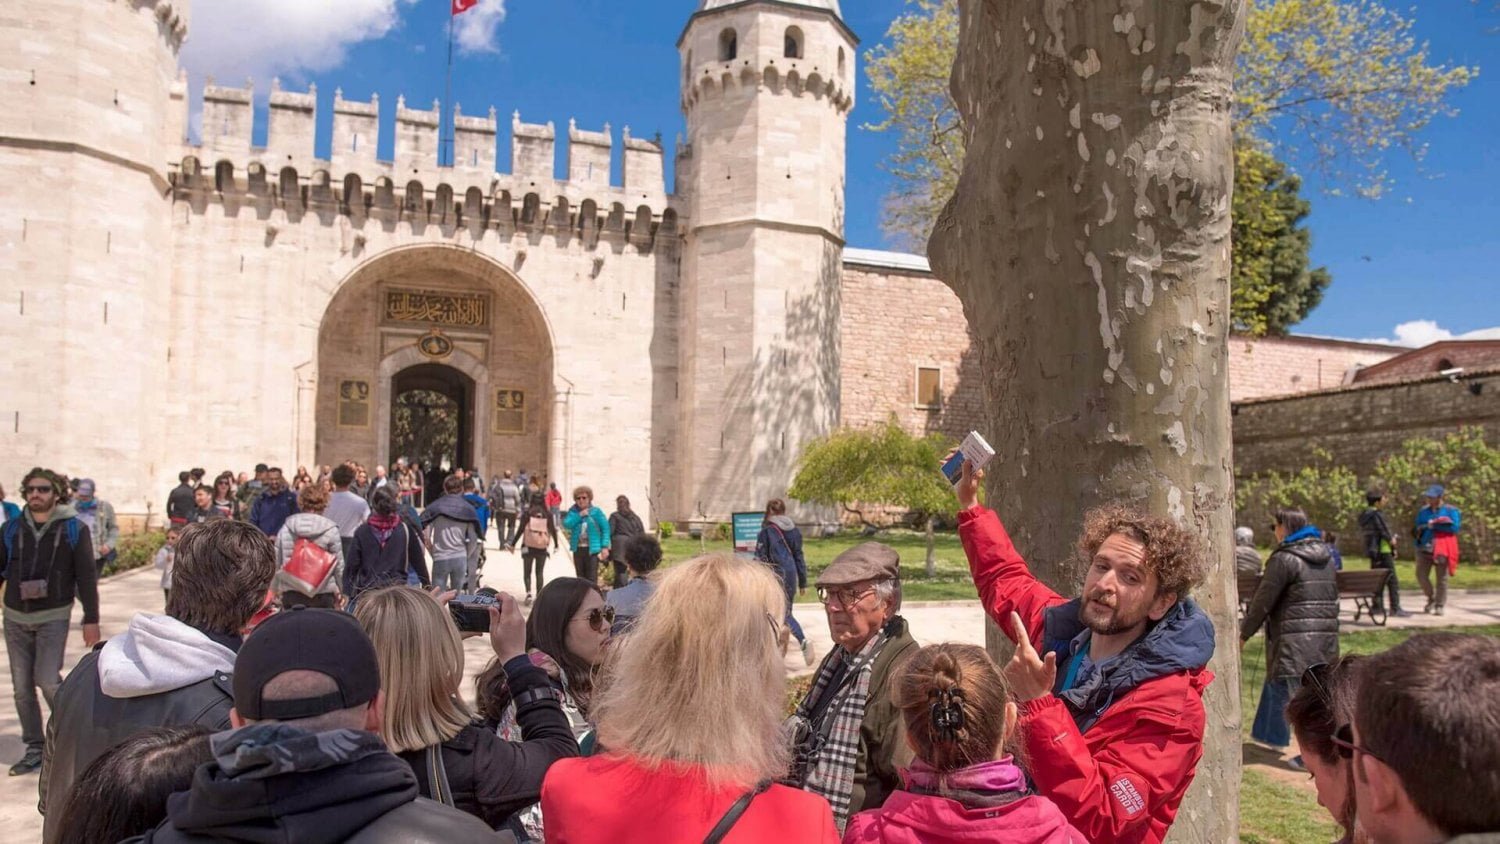 Topkapi Palace Museum Tickets and Tours: Compare + 5% discount

+ 2023